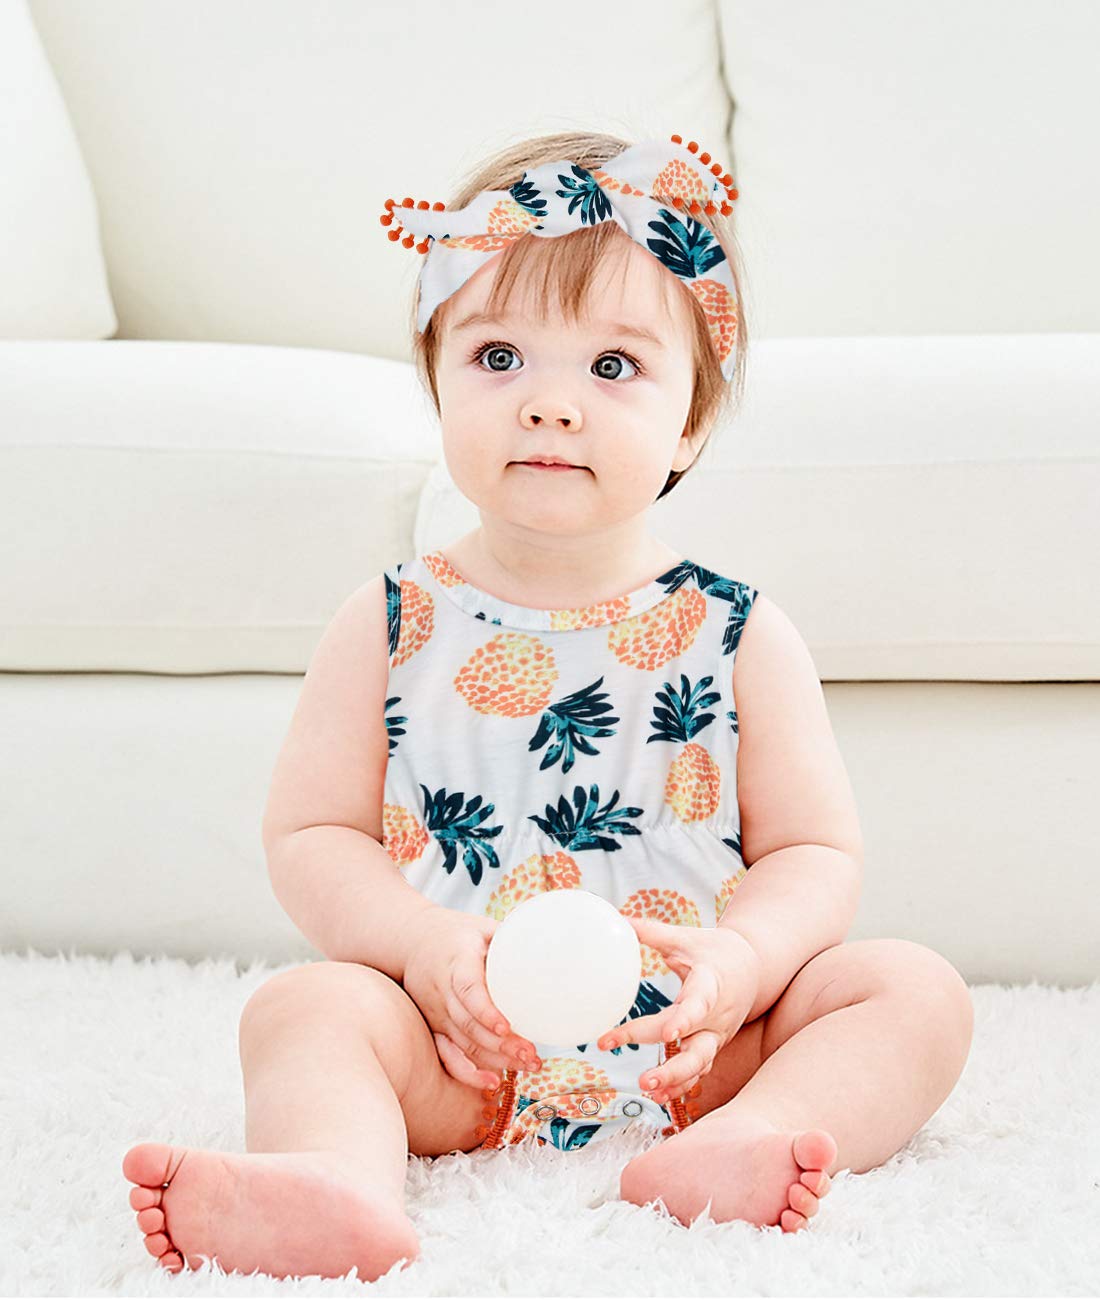 Baby Girl Clothes 0-24 Months Floral Sleeveless Newborn Romper Jumpsuit Outfit Set with Headband